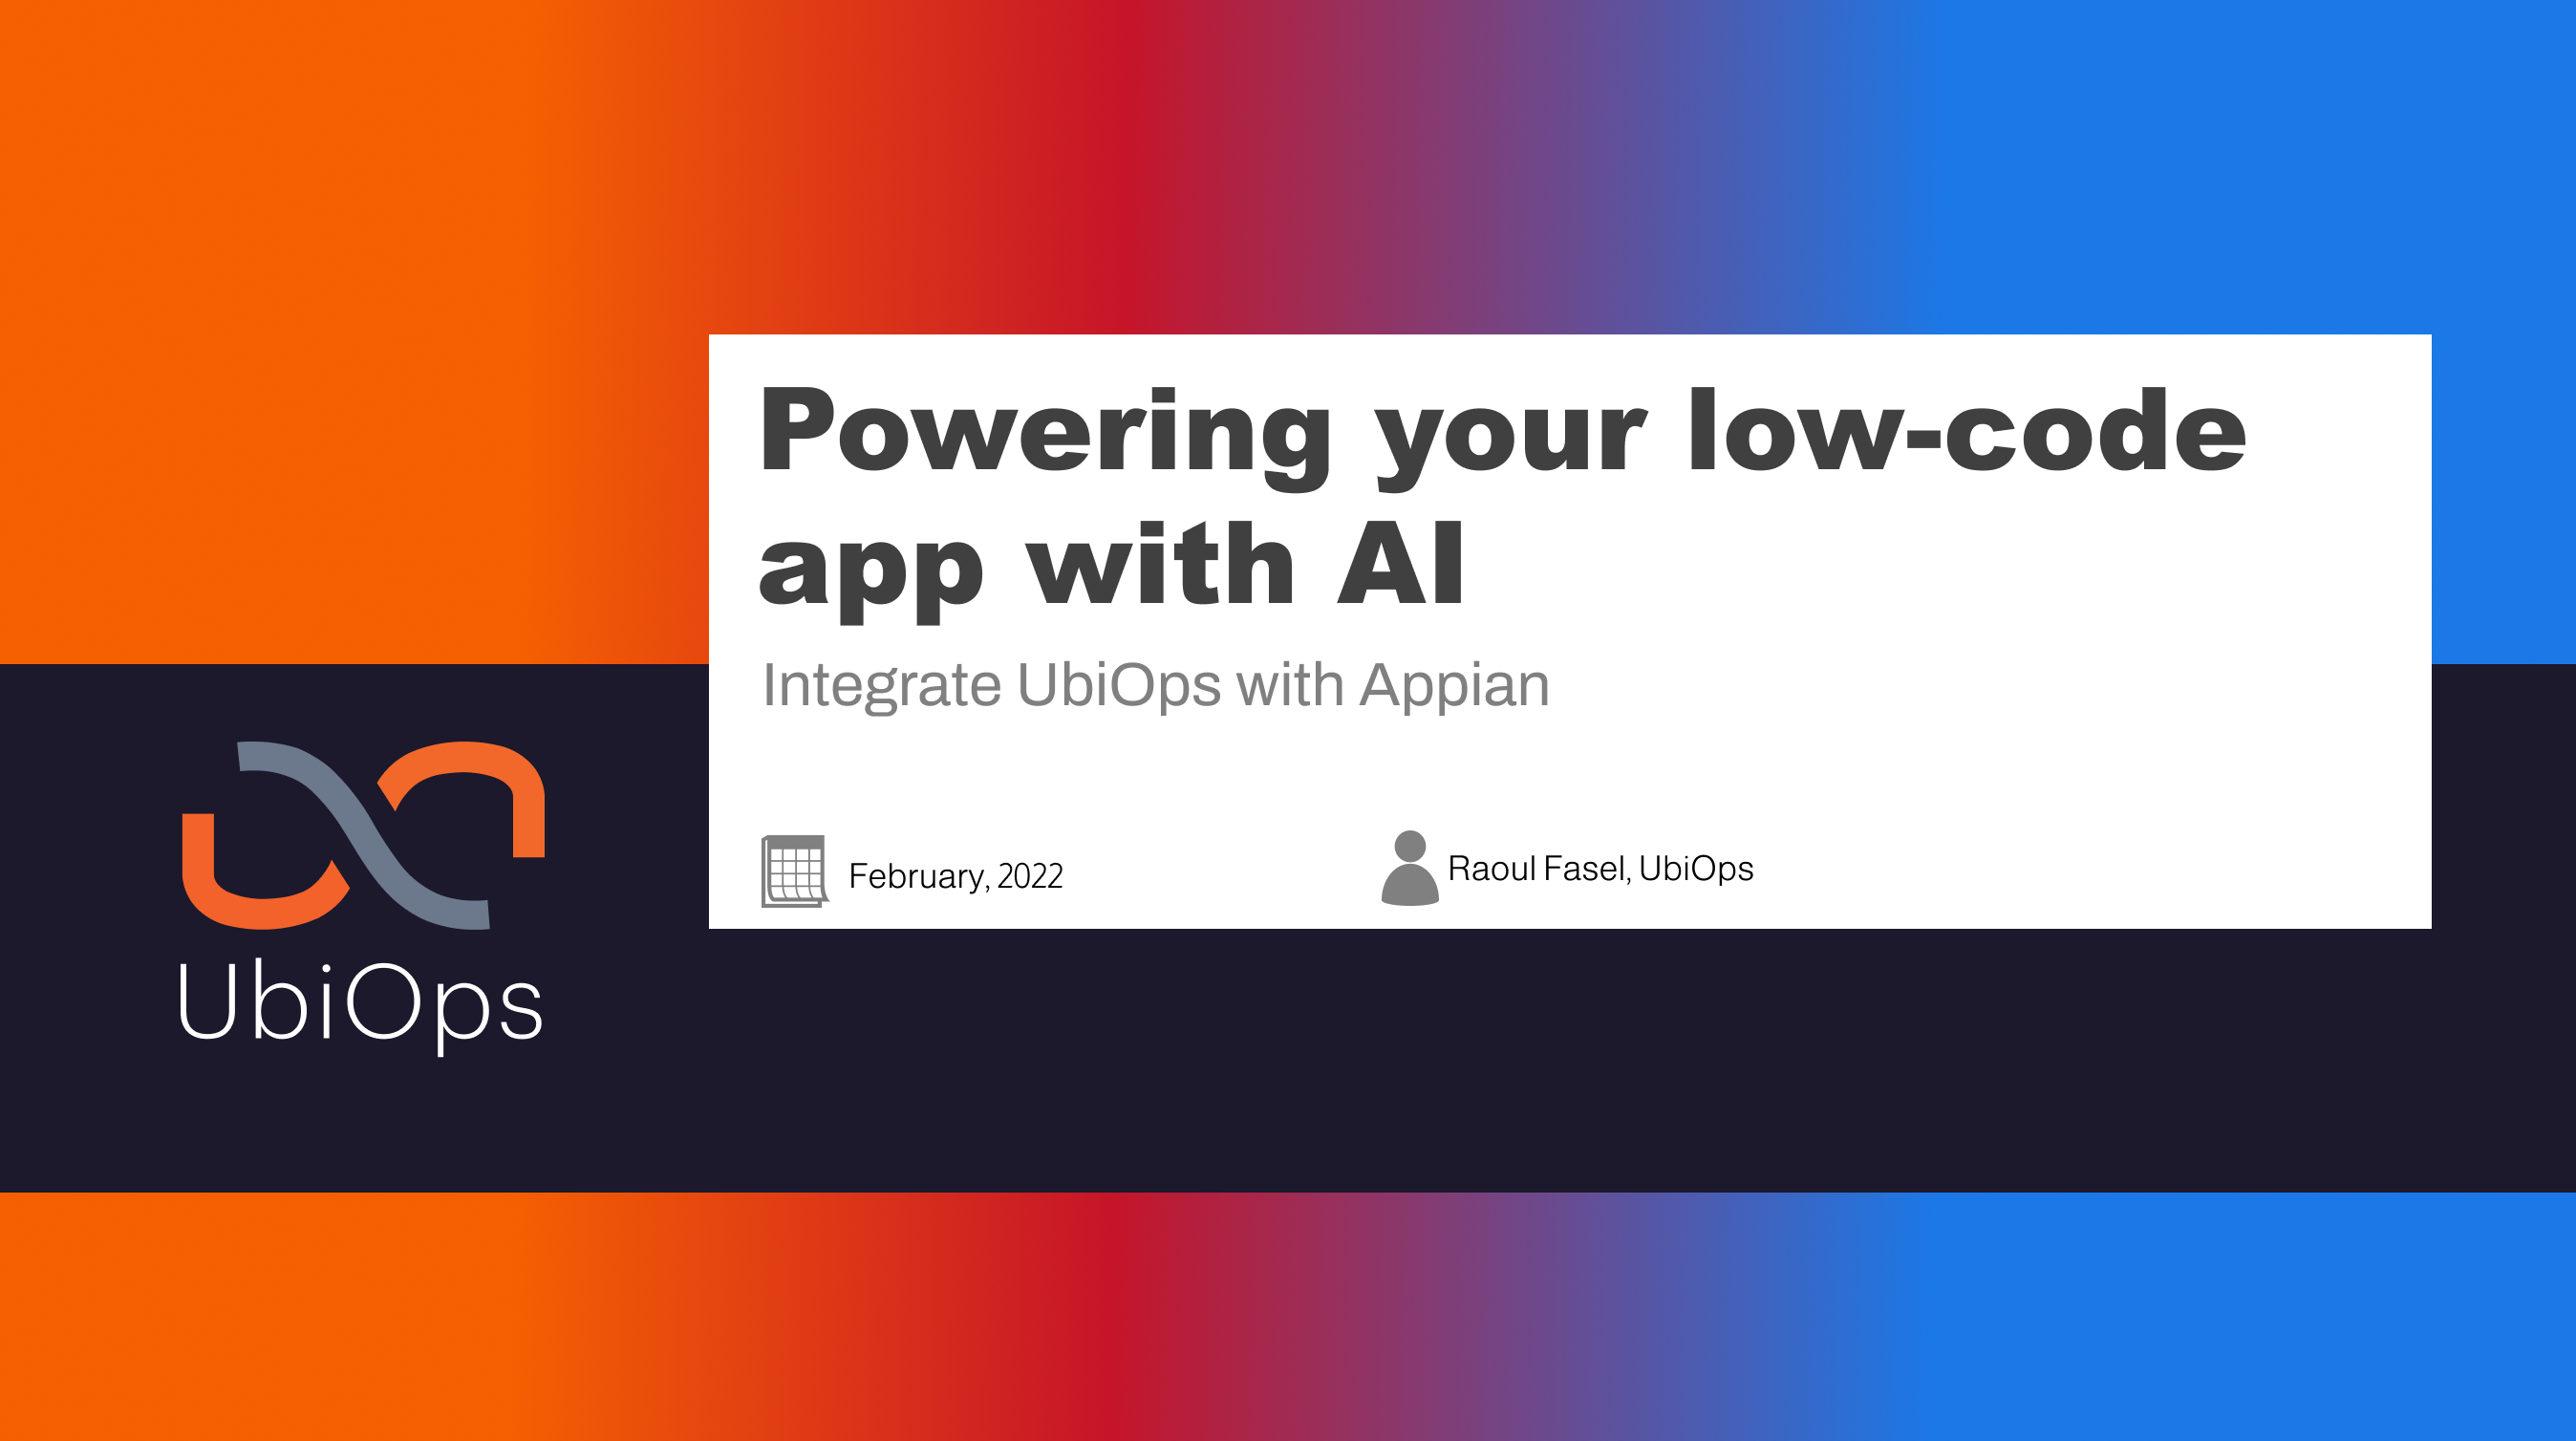 Powering your low-code app with AI. Integrate UbiOps with Appian